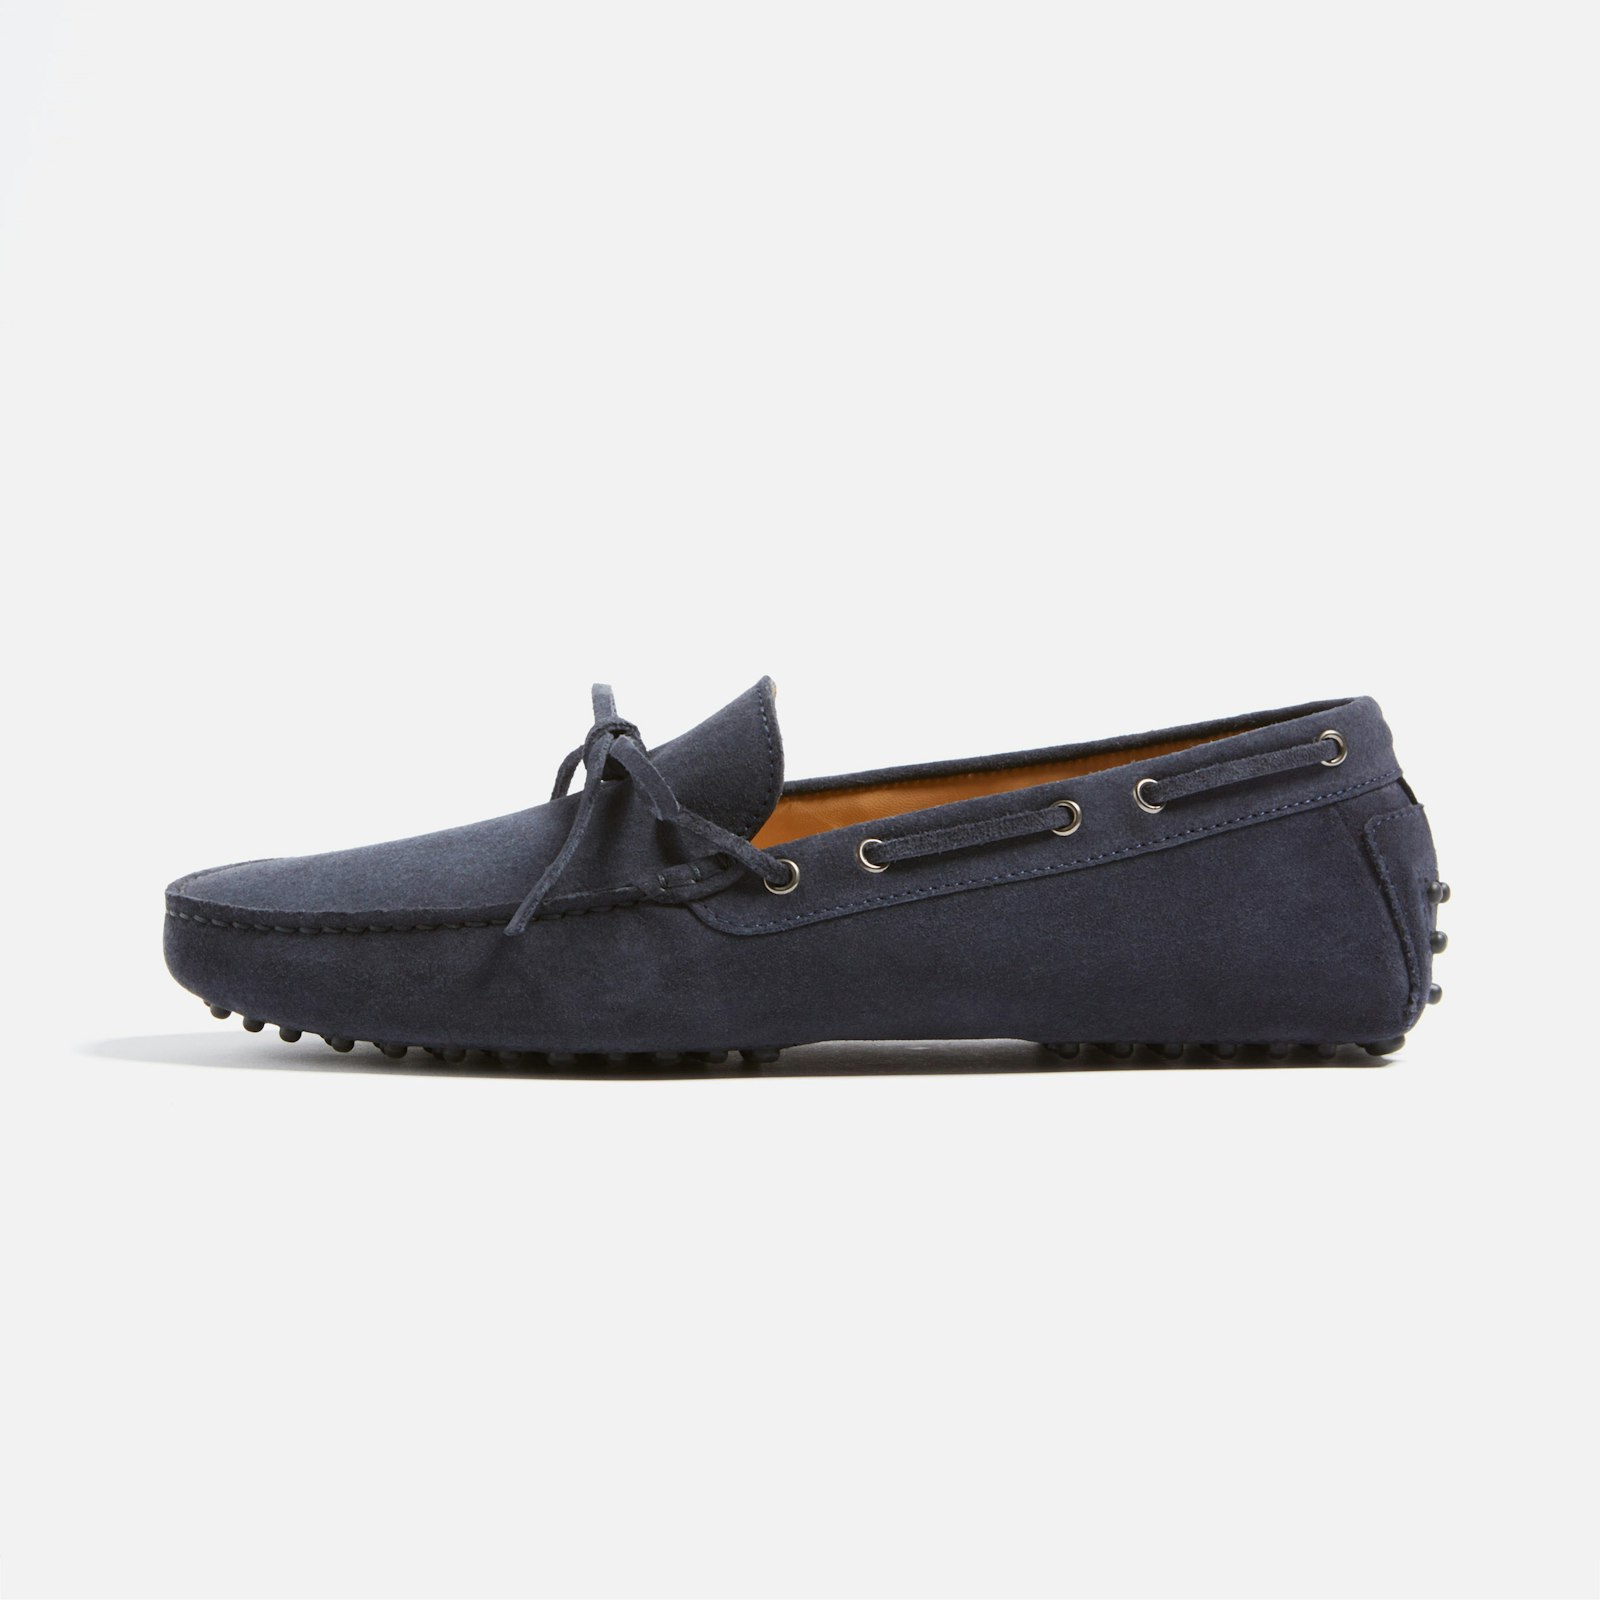 Lucca_LaceUp_DrivingShoe_Navy_1x1_LEFT_0326.jpg